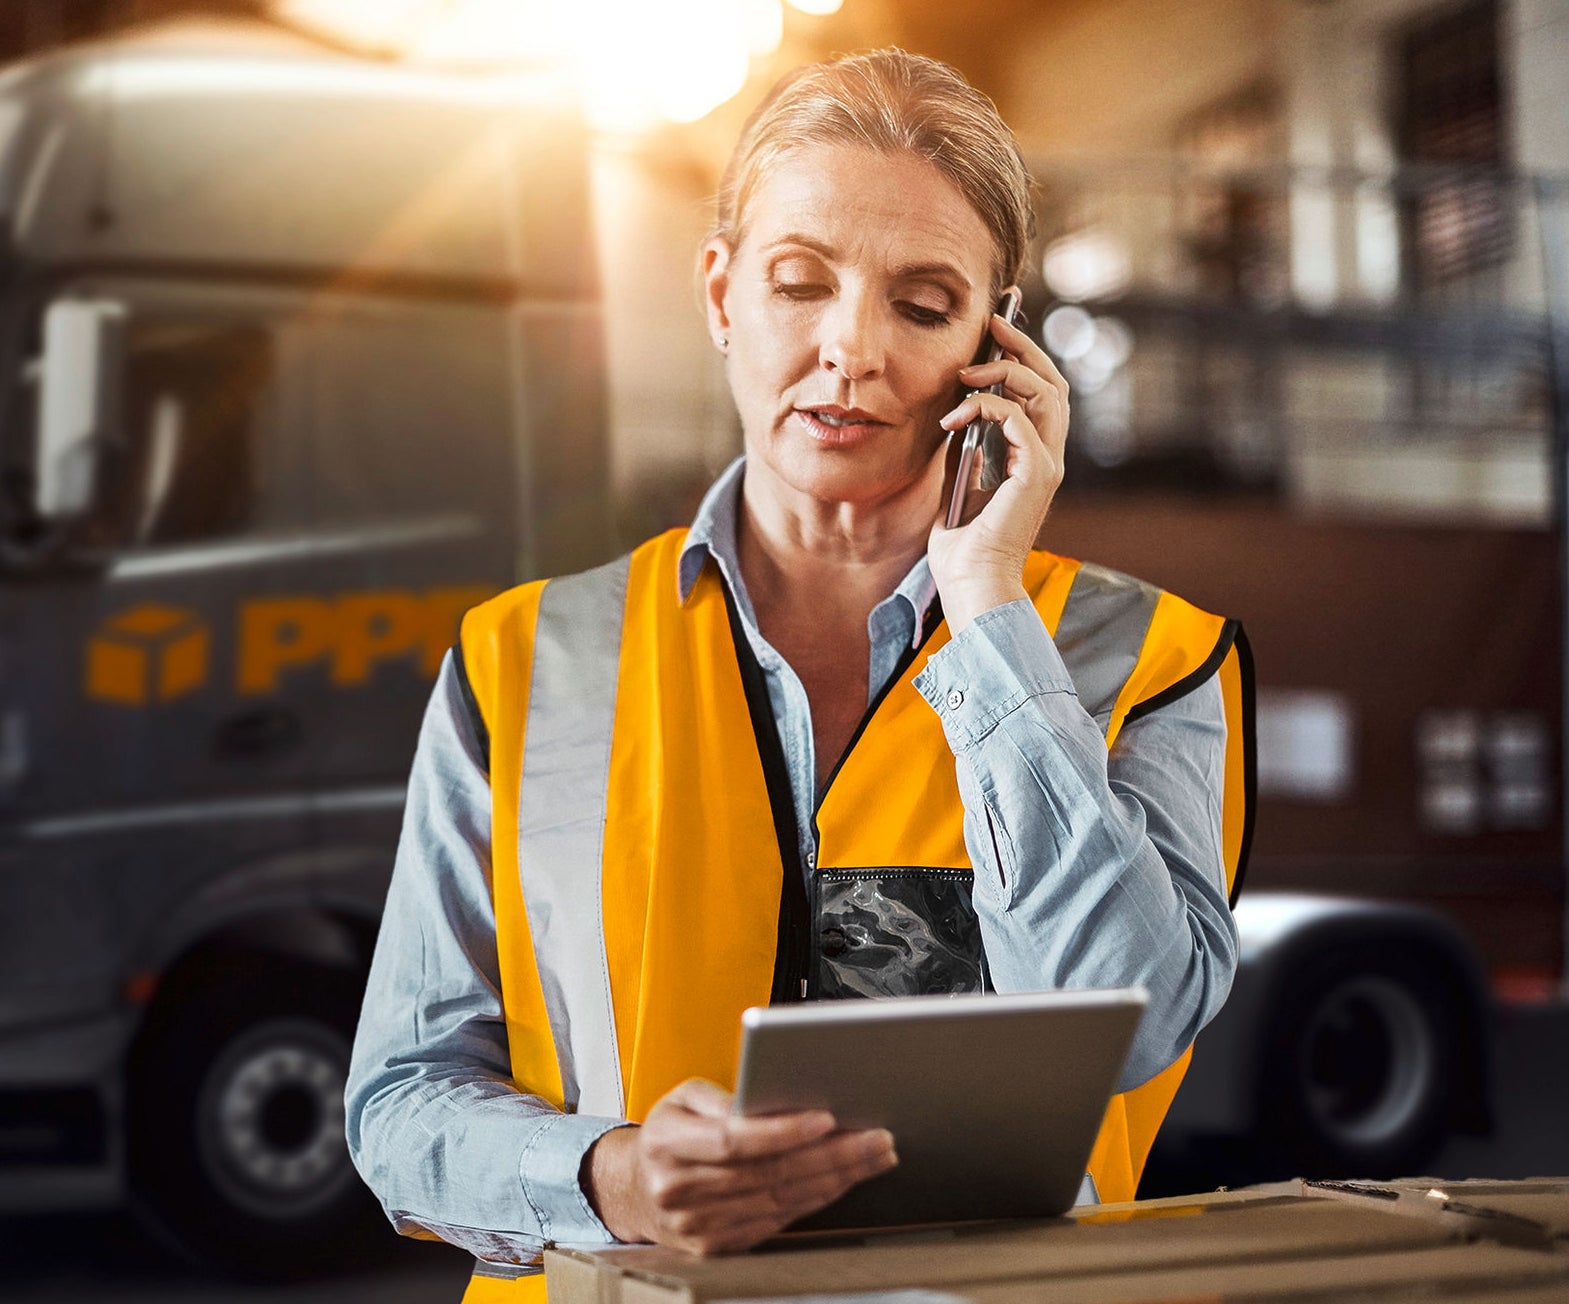 Shot of a mature woman using a mobile phone and digital tablet while working in a warehouse